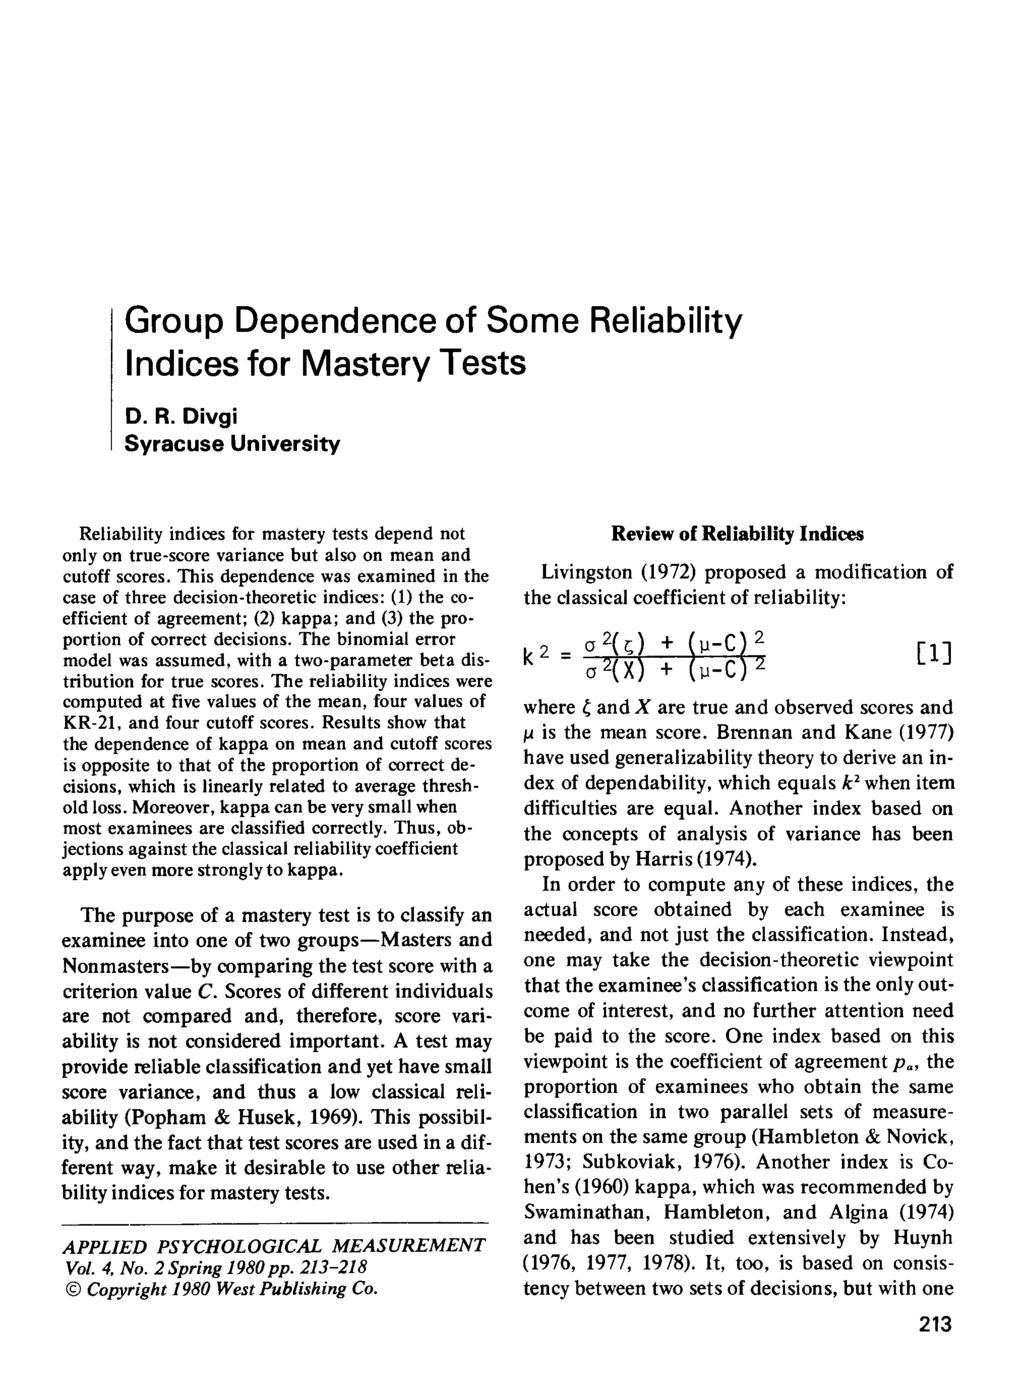 Group Dependence of Some Reliability Indices for astery Tests D. R. Divgi Syracuse University Reliability indices for mastery tests depend not only on true-score variance but also on mean and cutoff scores.